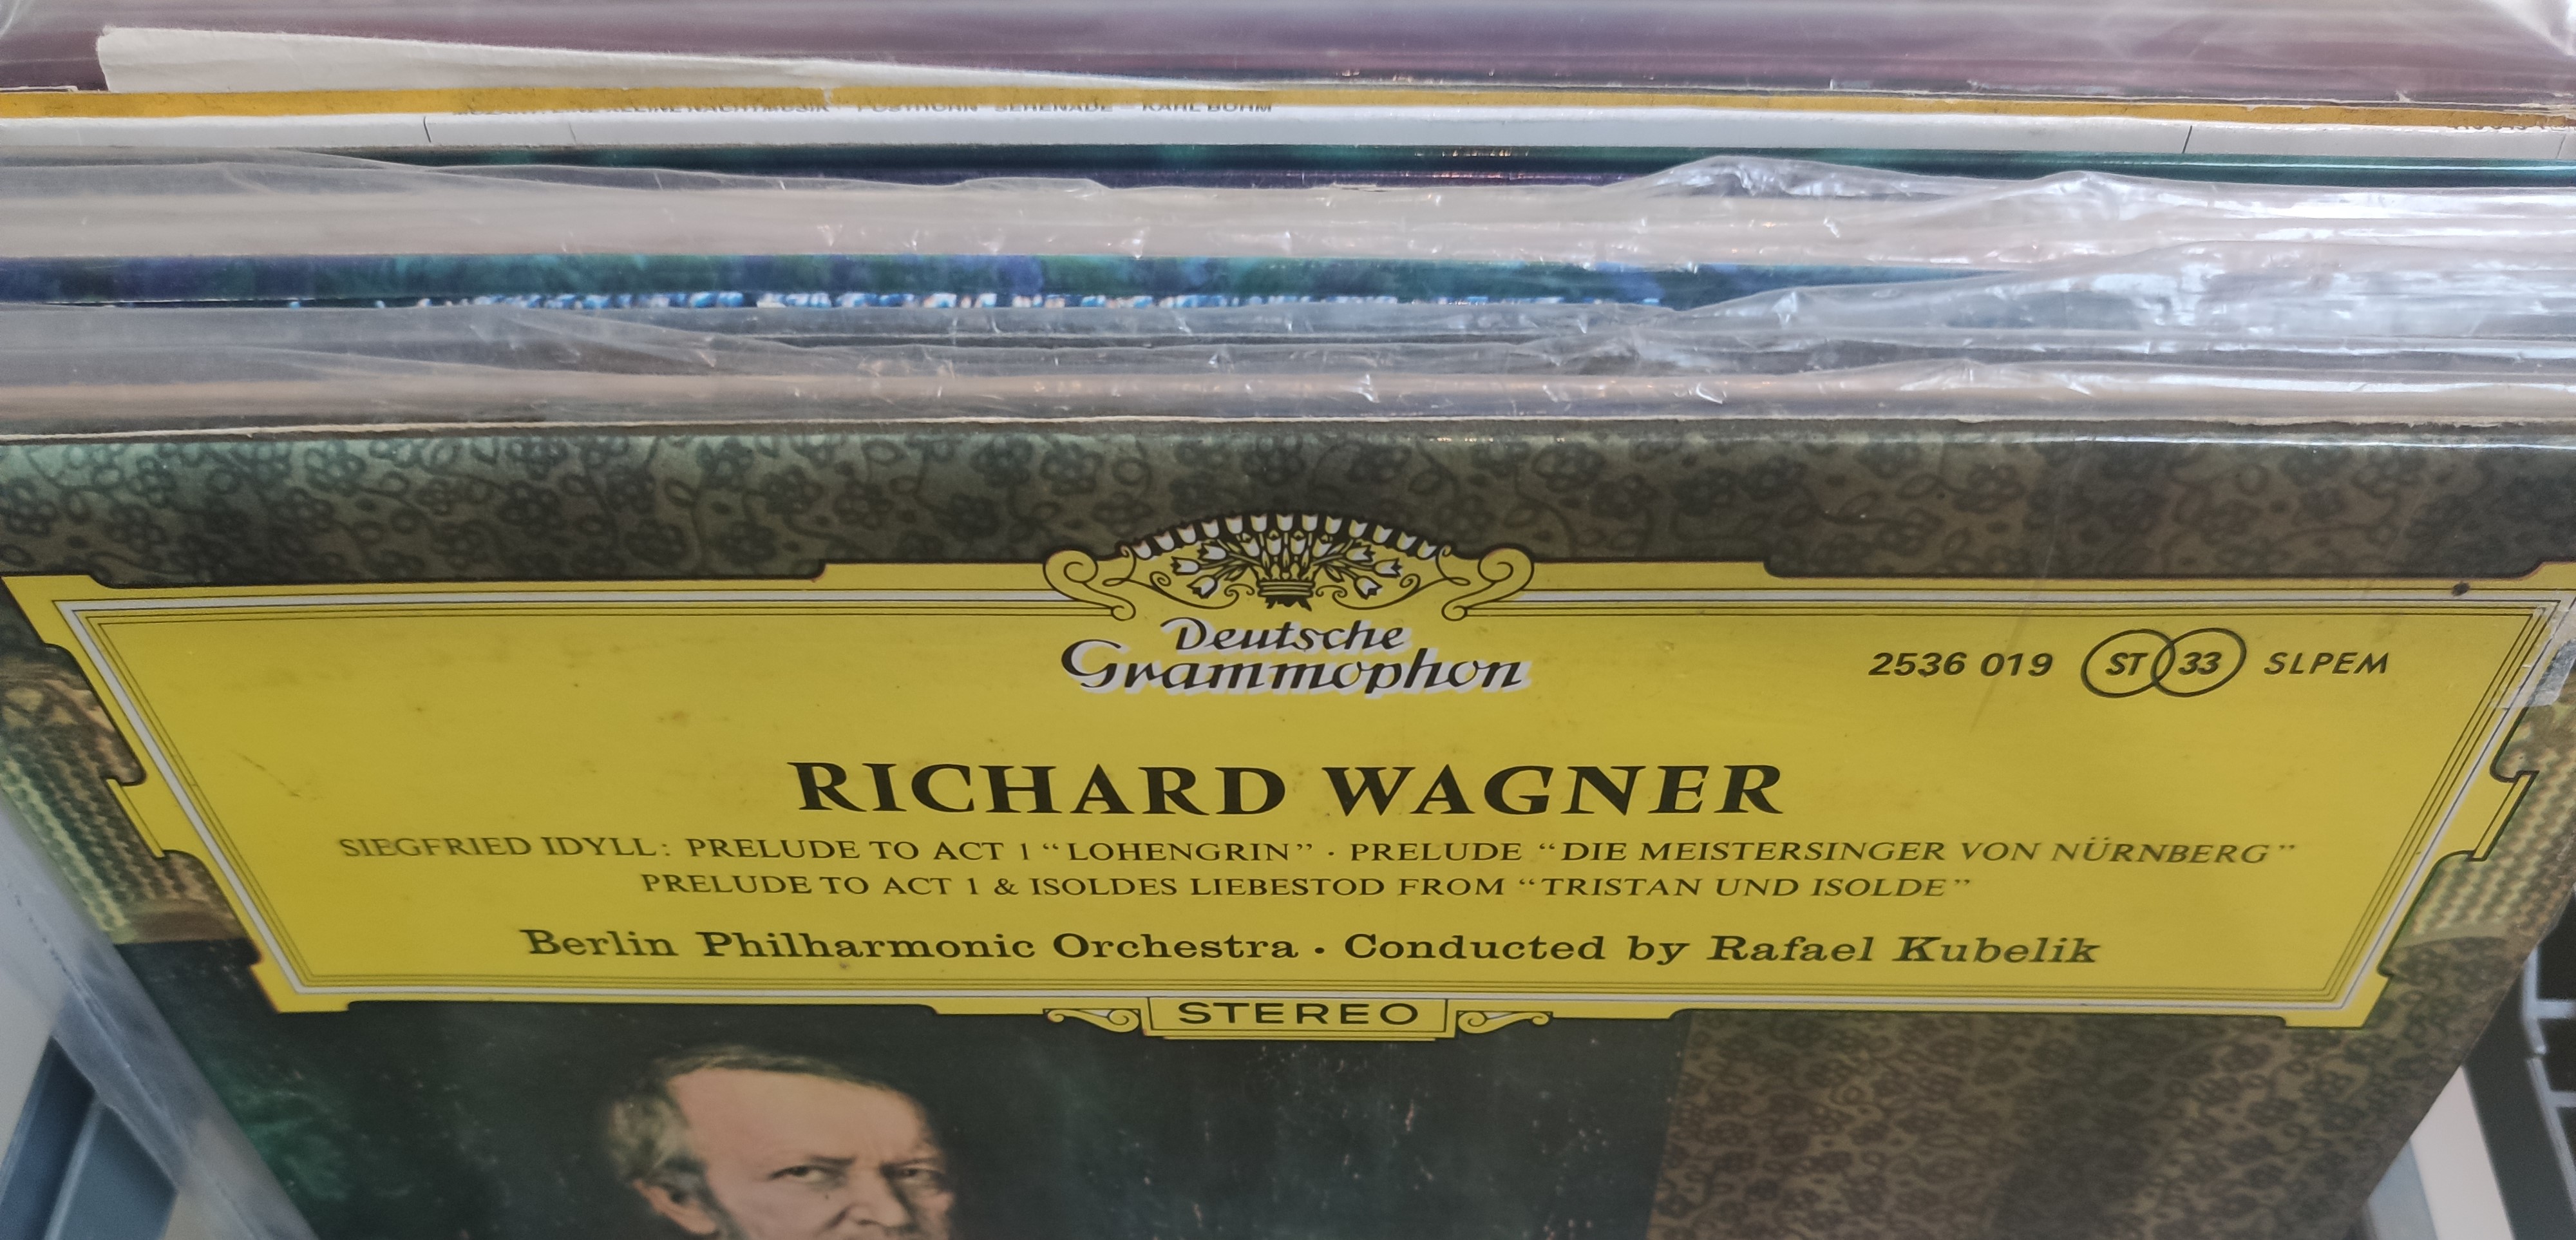 A Fantastic Collection of Deutsche Gramophone Classical Records. Digital and Stereo Etc. - Image 11 of 11